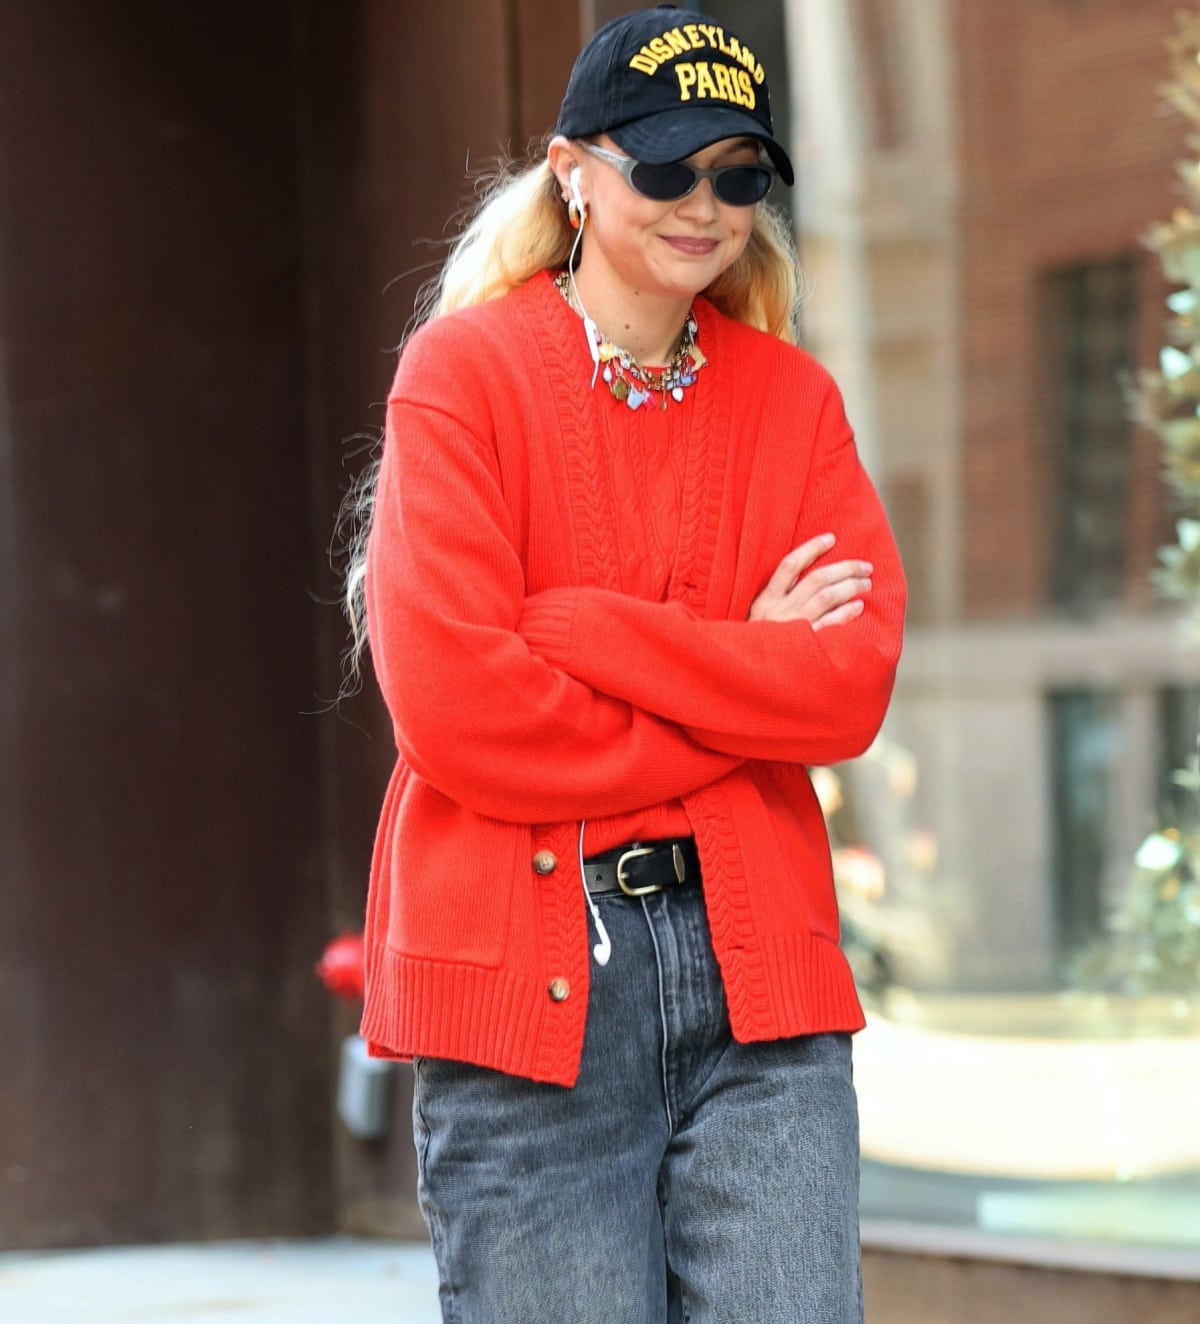 Gigi Hadid styled her look with a Thesagevintage x Haricot Vert “Favorite Things” Charmie necklace, oversized gold hoop earrings, Giorgio Armani 2504 sunglasses, and a Disneyland Paris baseball cap